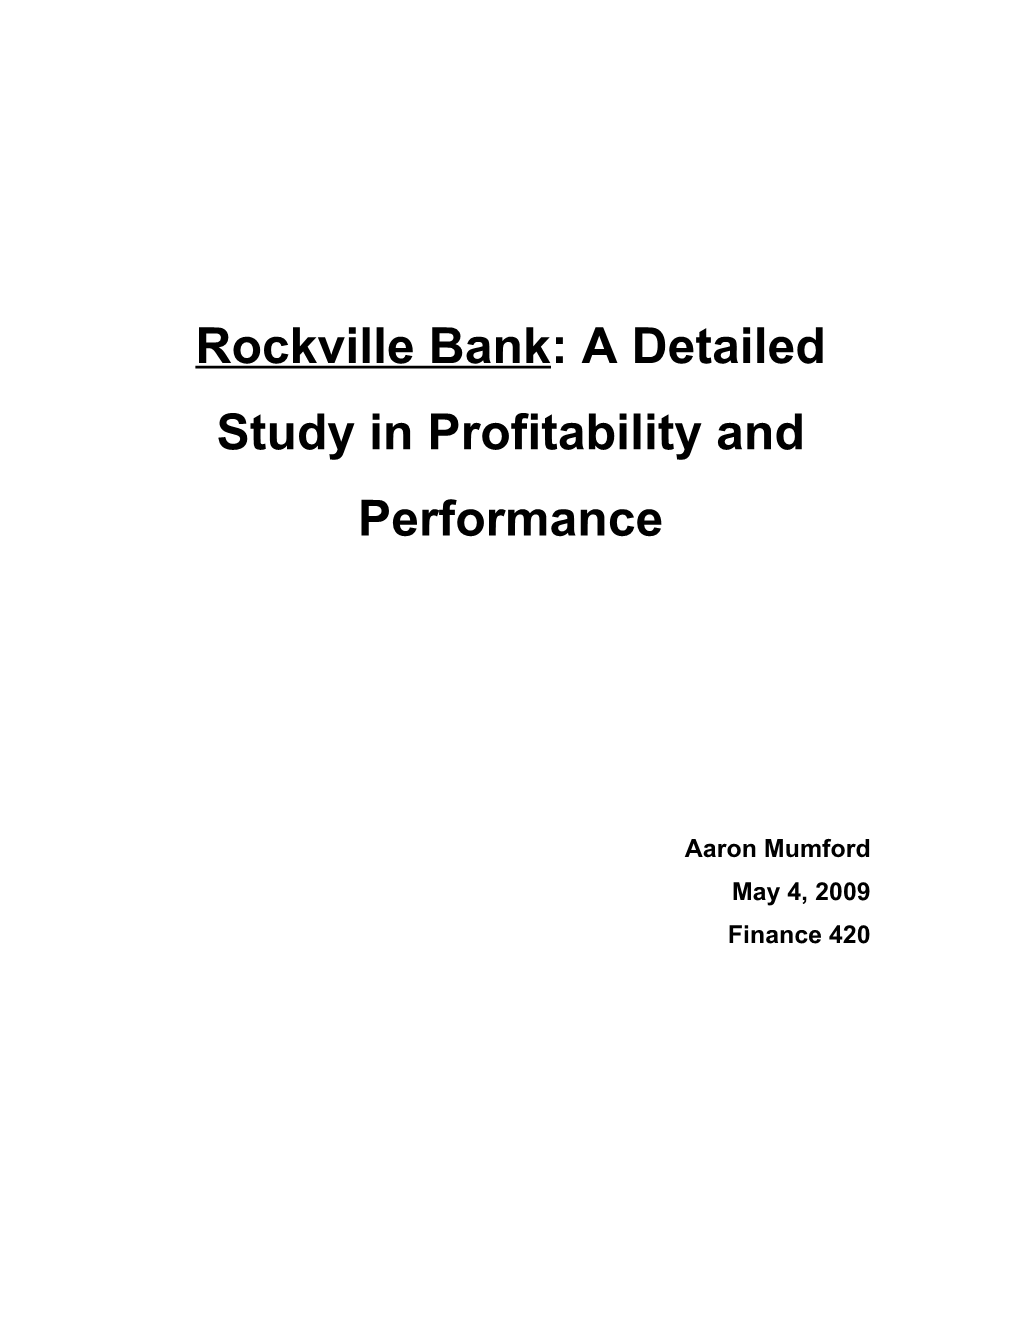 Rockville Bank: a Detailed Study in Profitability and Performance